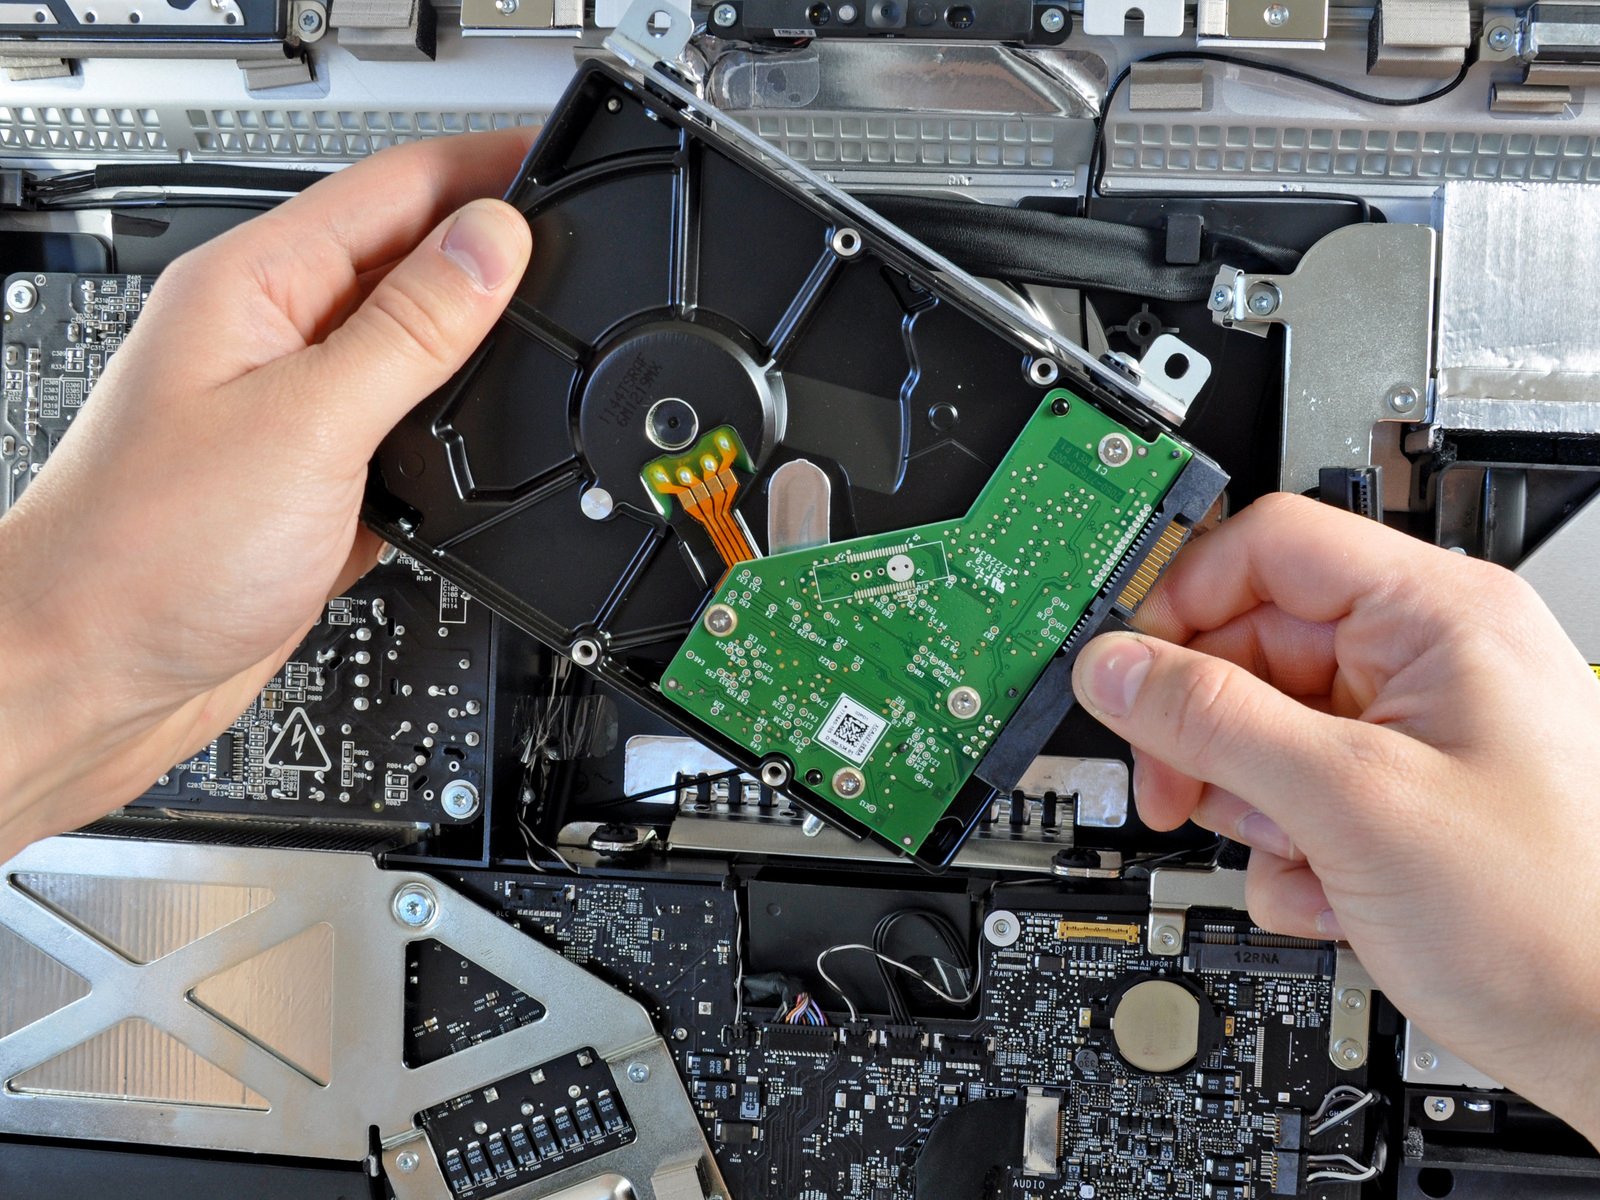 imac hard drive replacement cost